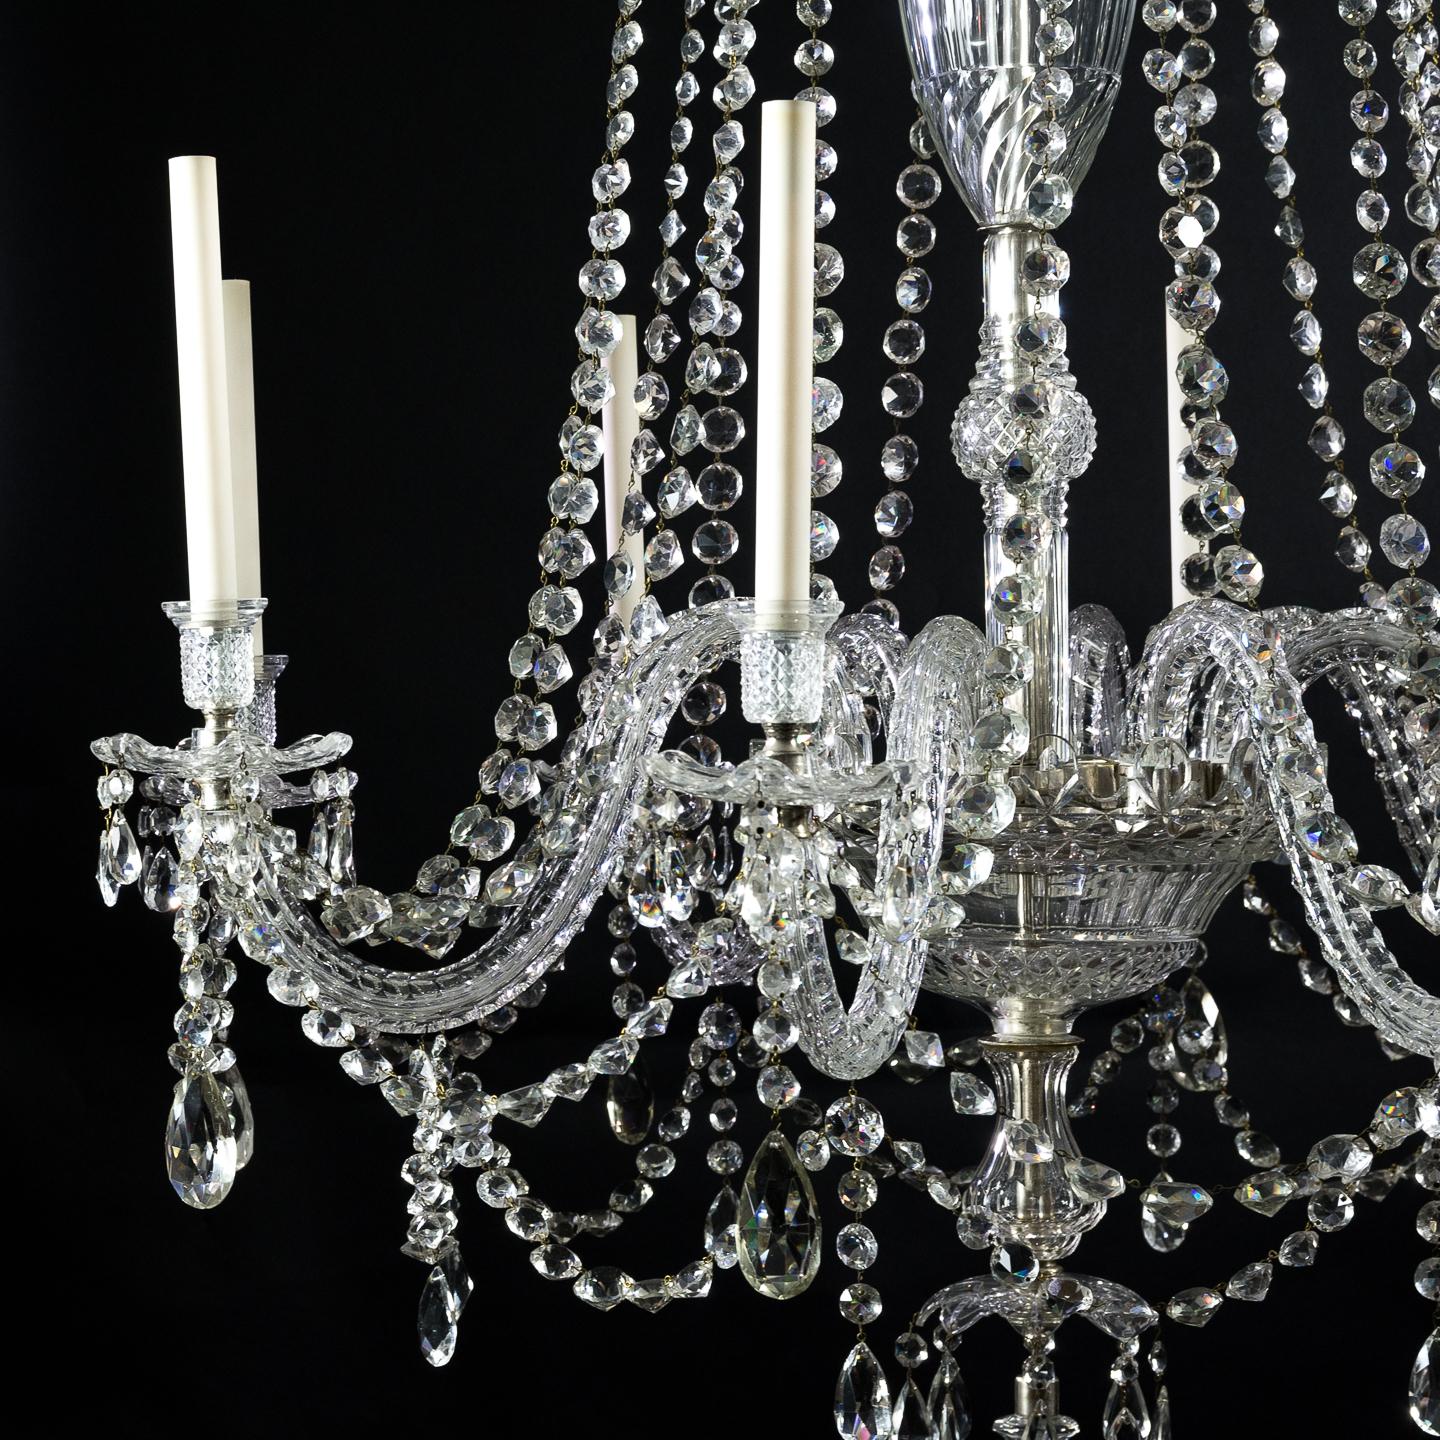 A fine English Georgian style eight-light crystal chandelier, early 20th century in the manner of F. & C. Osler Ltd, with generous tiered hobnail cut corona above sectional baluster stem, the conforming hobnail cut bowl and receiver issuing eight